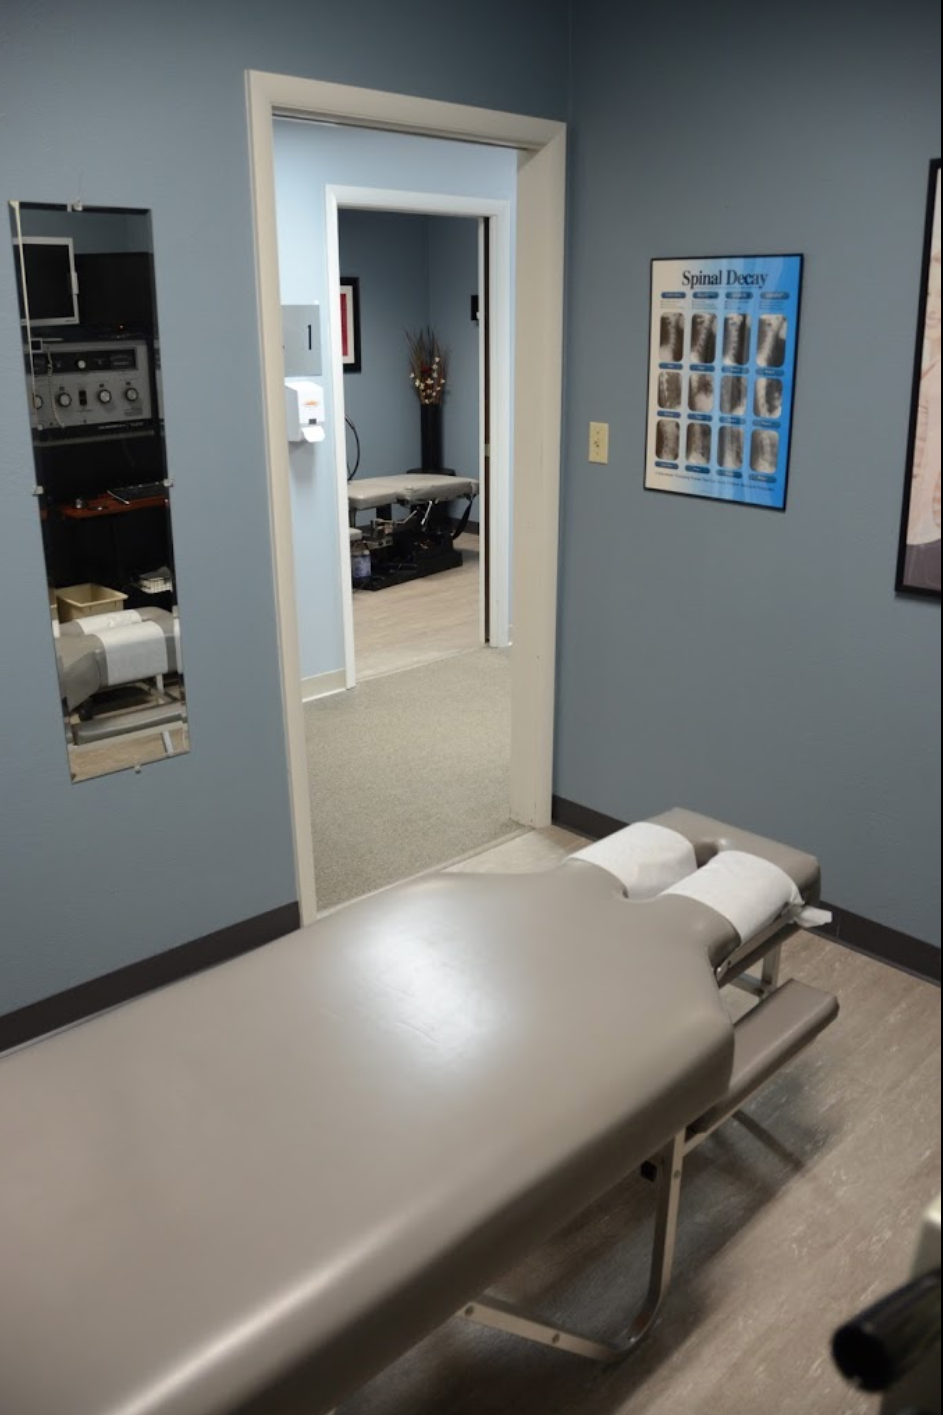 Large private treatment rooms